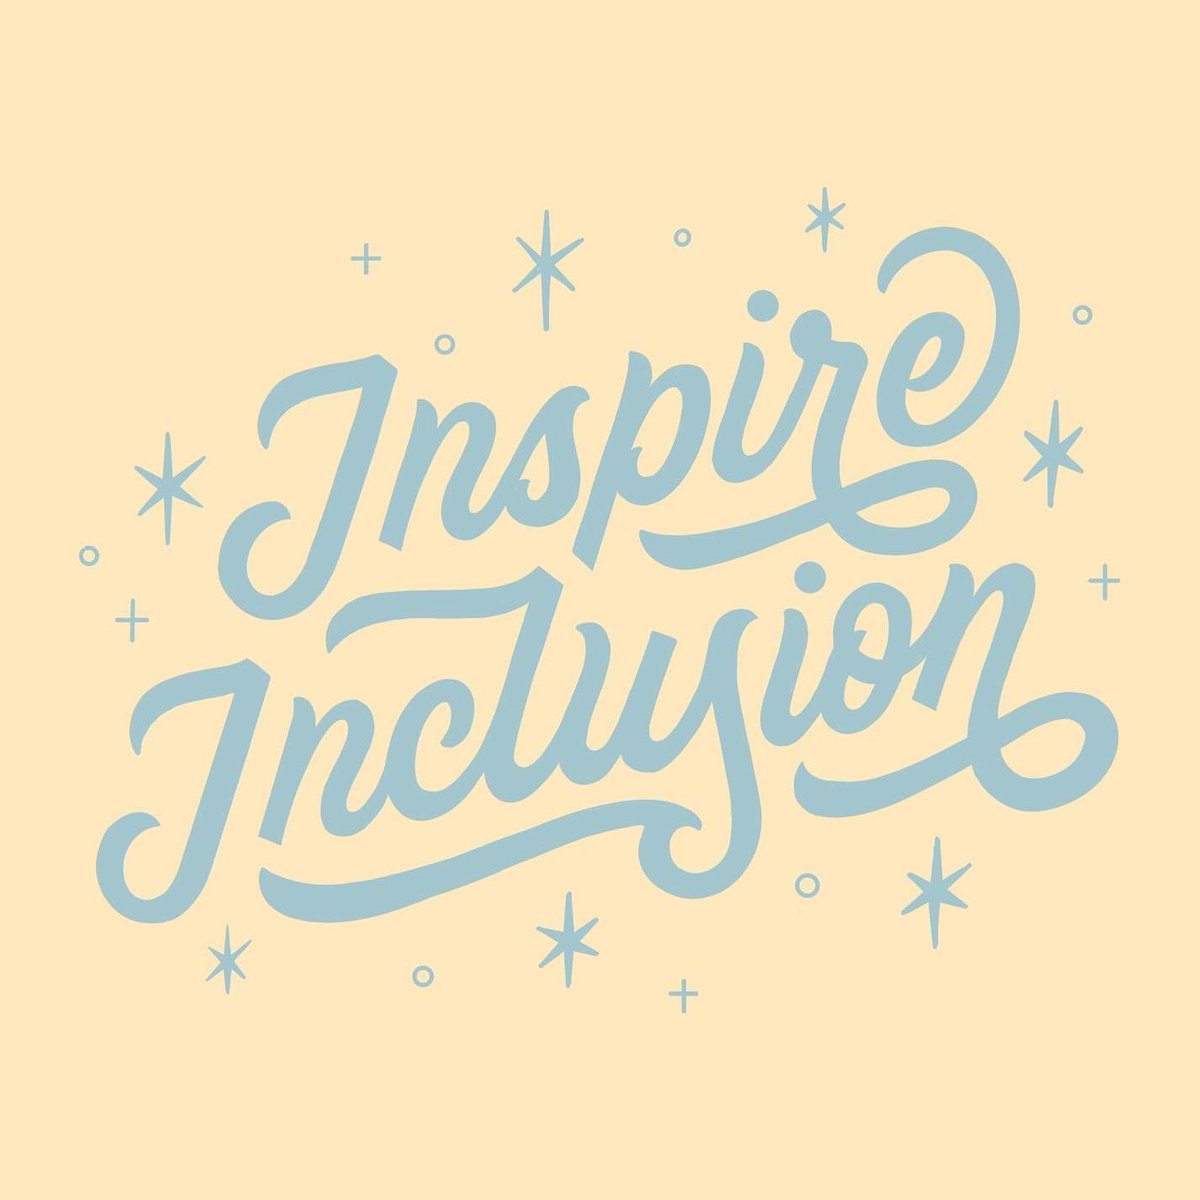 So many talented #creatives around the 🌎️ shared their fabulous #artwork for the #InternationalWomensDay #IWDTypism challenge - like #FreshlyMadeType in the #USA 🇺🇸 with this beautiful pastel #design &  elegant #InspireInclusion #lettering😍 #womenoftype #typism #IWD #dailytype